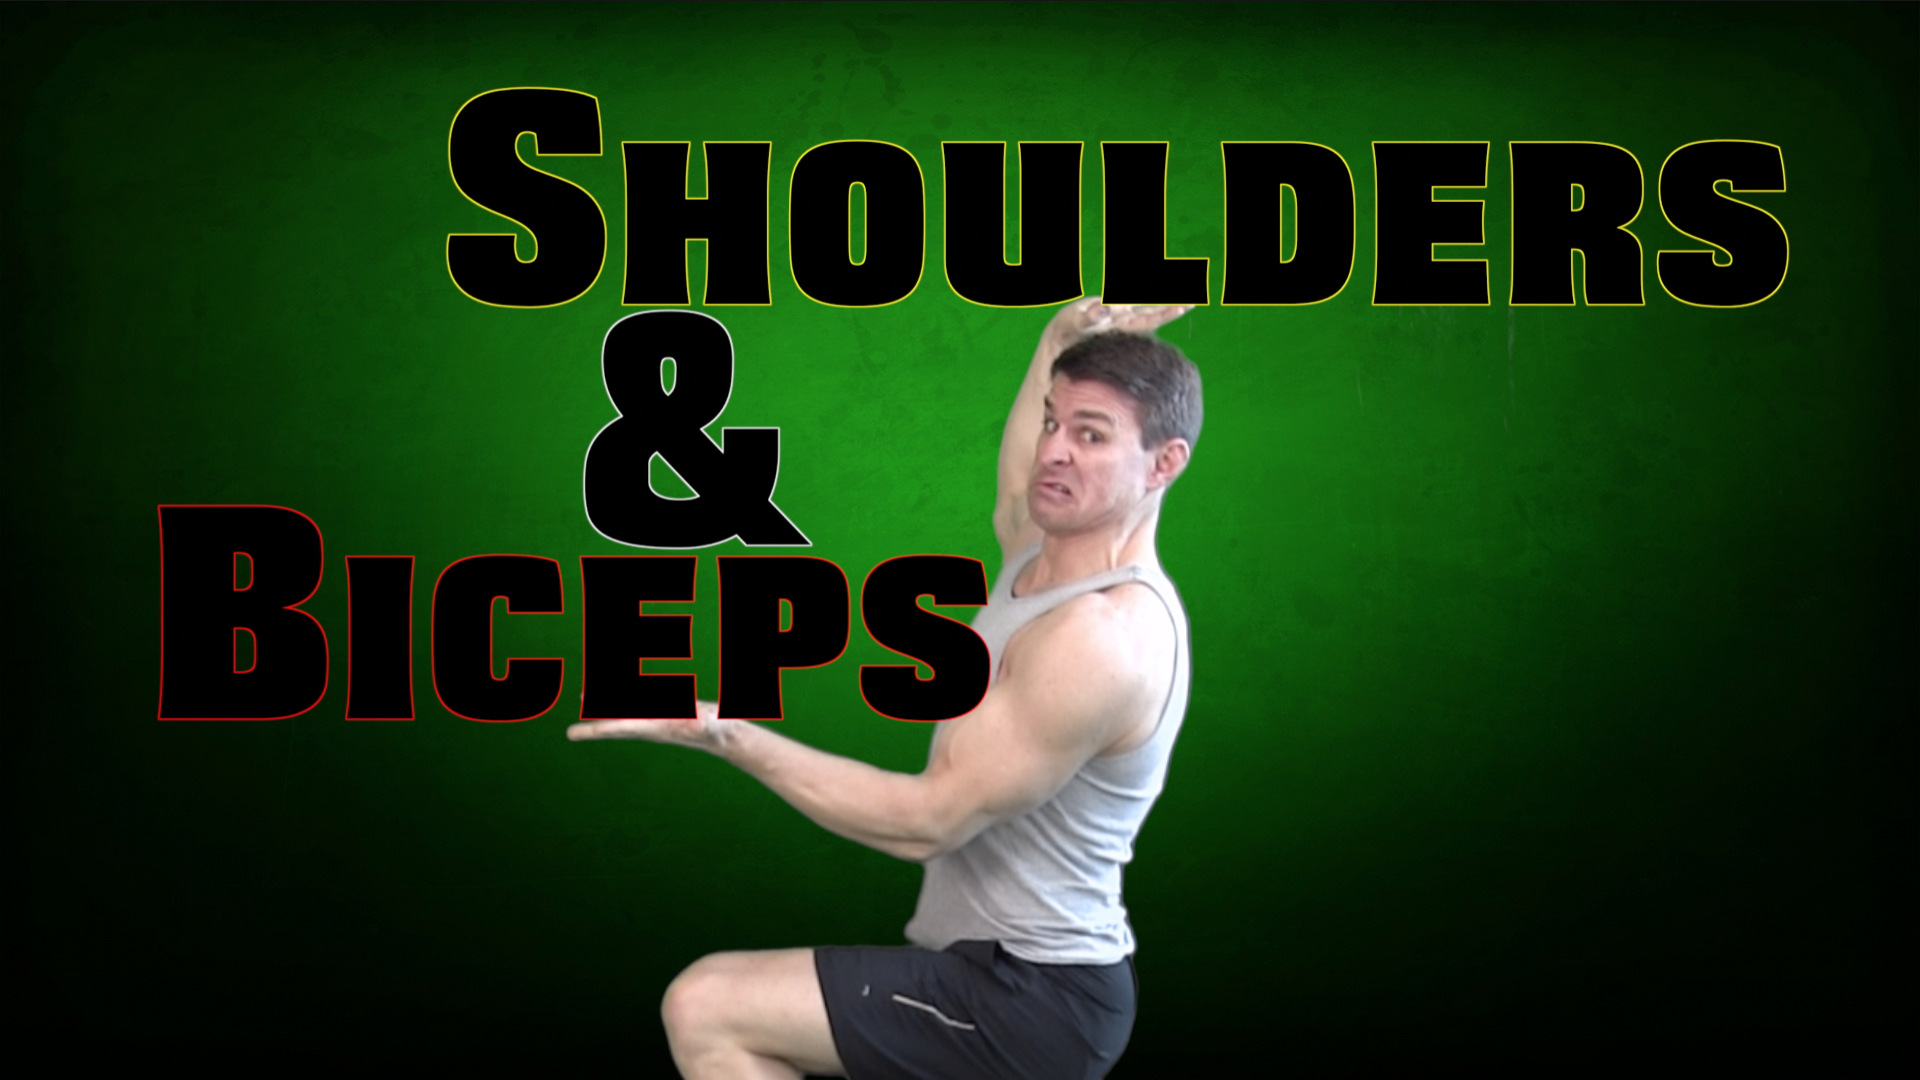 relentless fit 365 biceps shoulders strength training workout